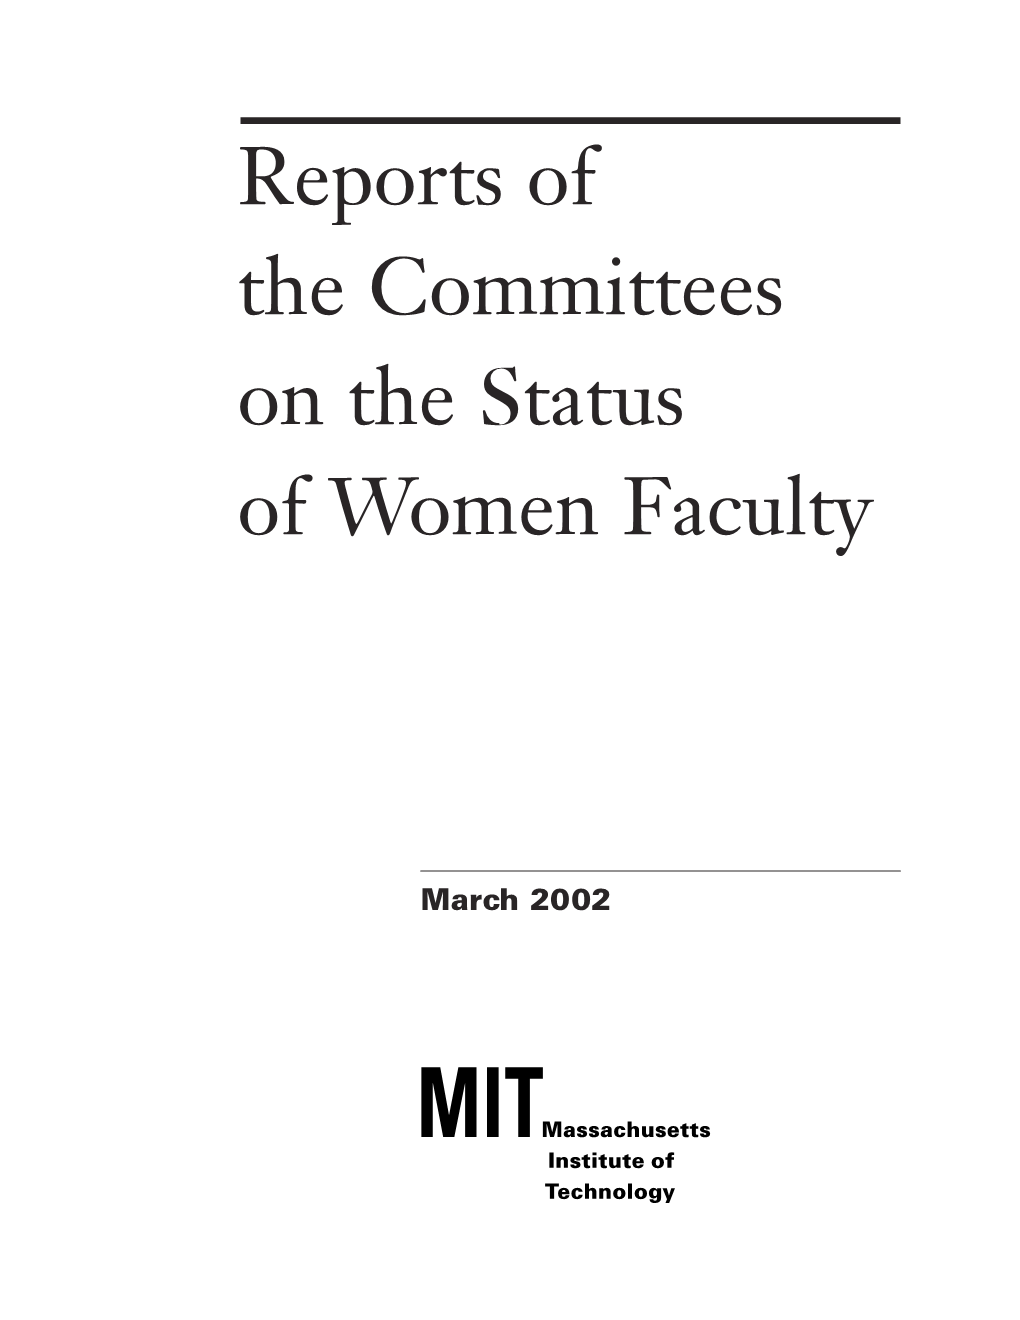 Reports of the Committees on the Status of Women Faculty